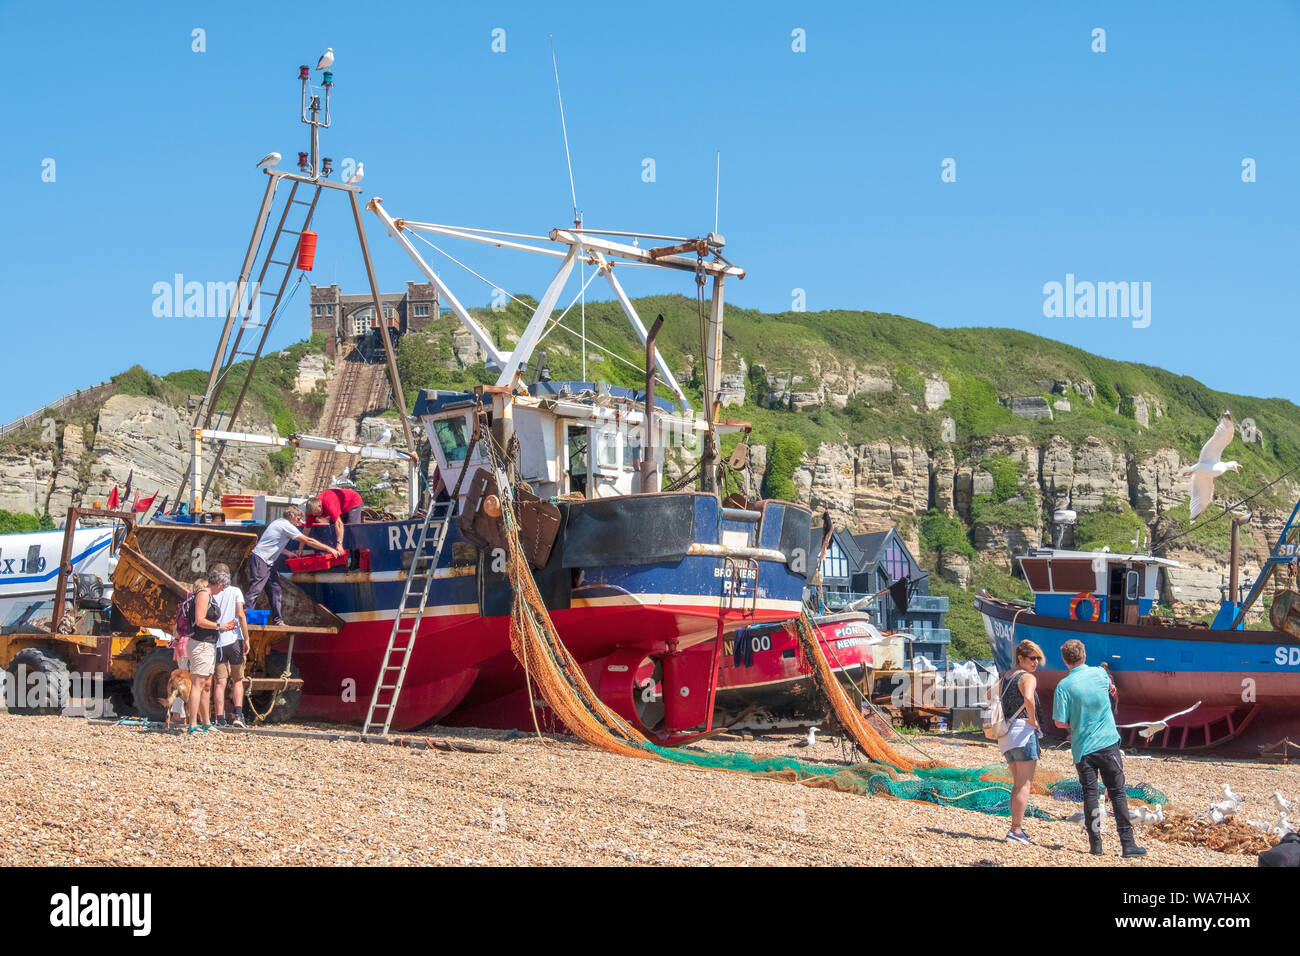 Hastings fishing trawler landing catch of fish on the Old Town Stade fishing boat beach, East Sussex, South Coast, England, UK, fishing boats Stock Photo